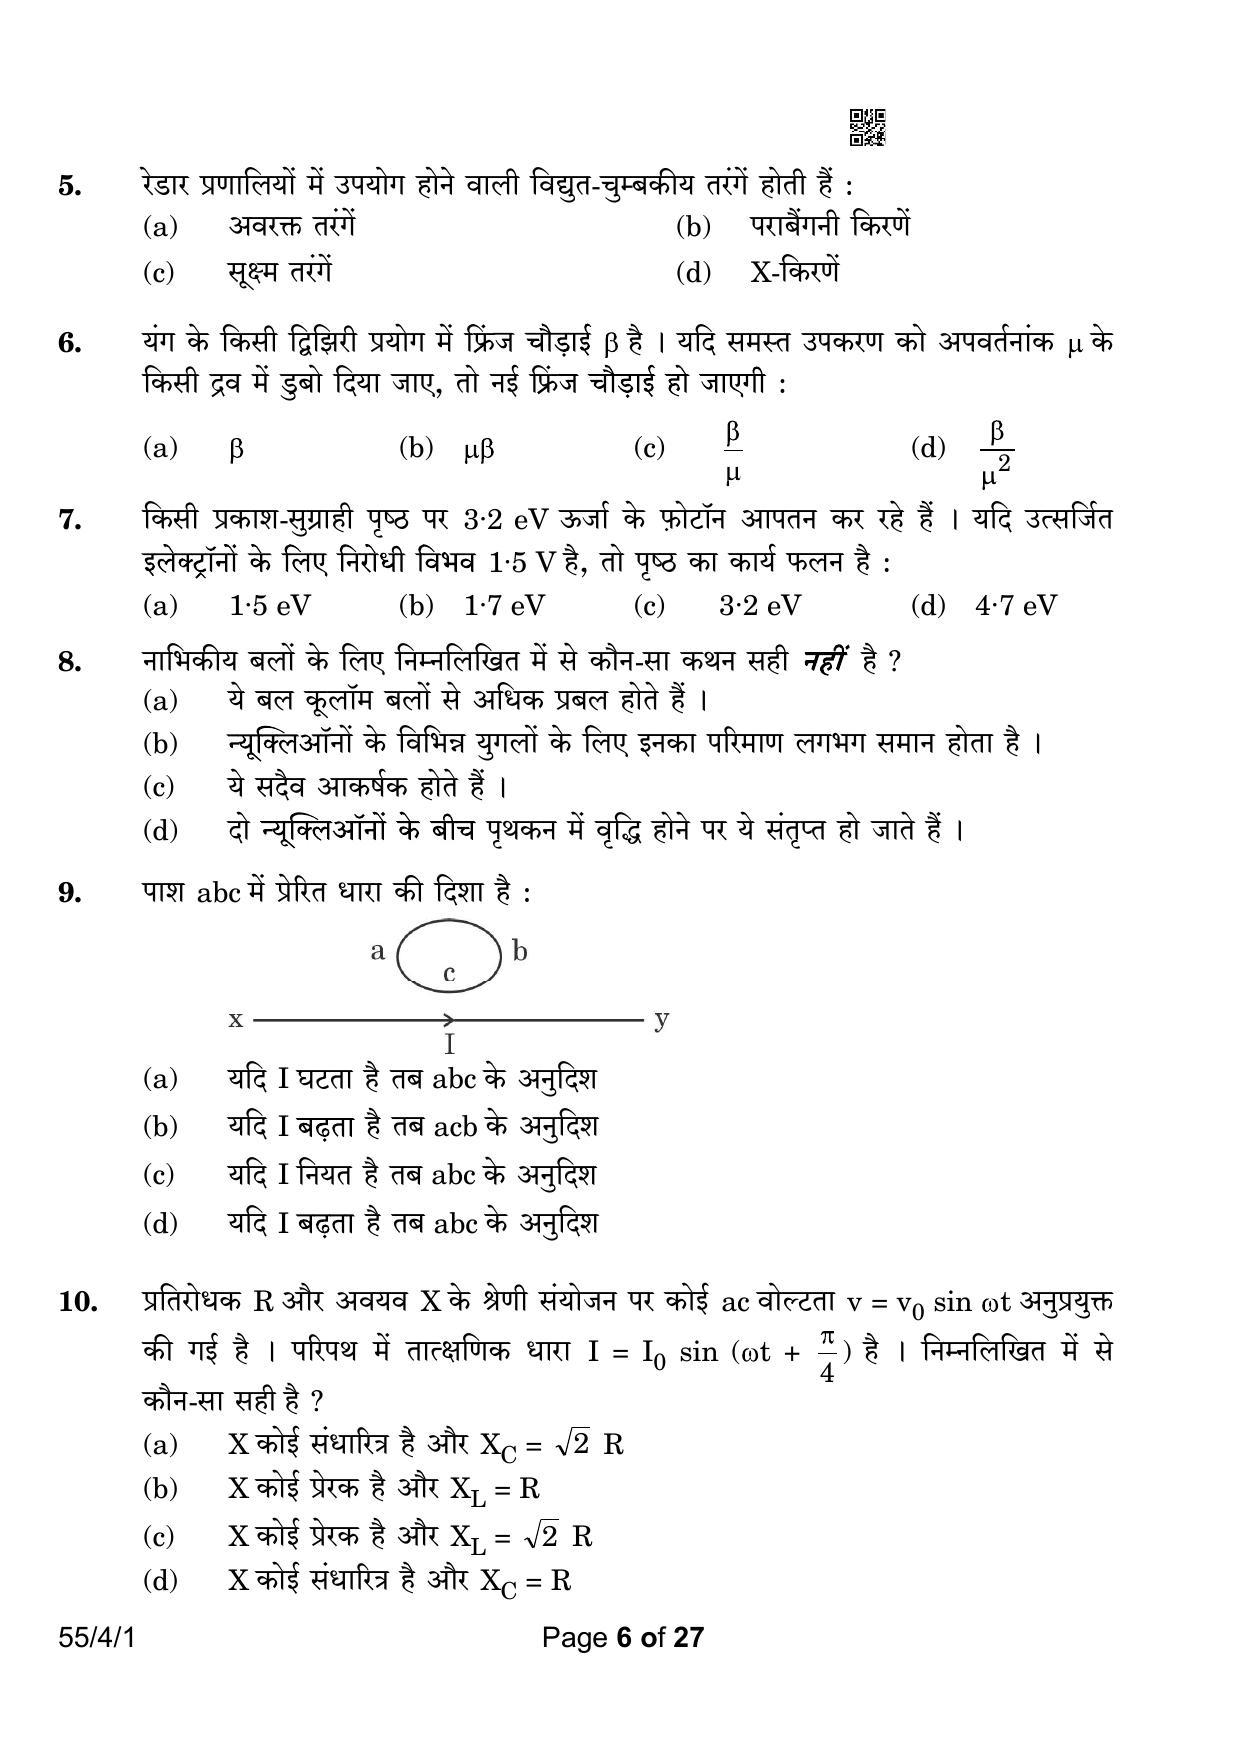 CBSE Class 12 55-4-1 Physics 2023 Question Paper - Page 6